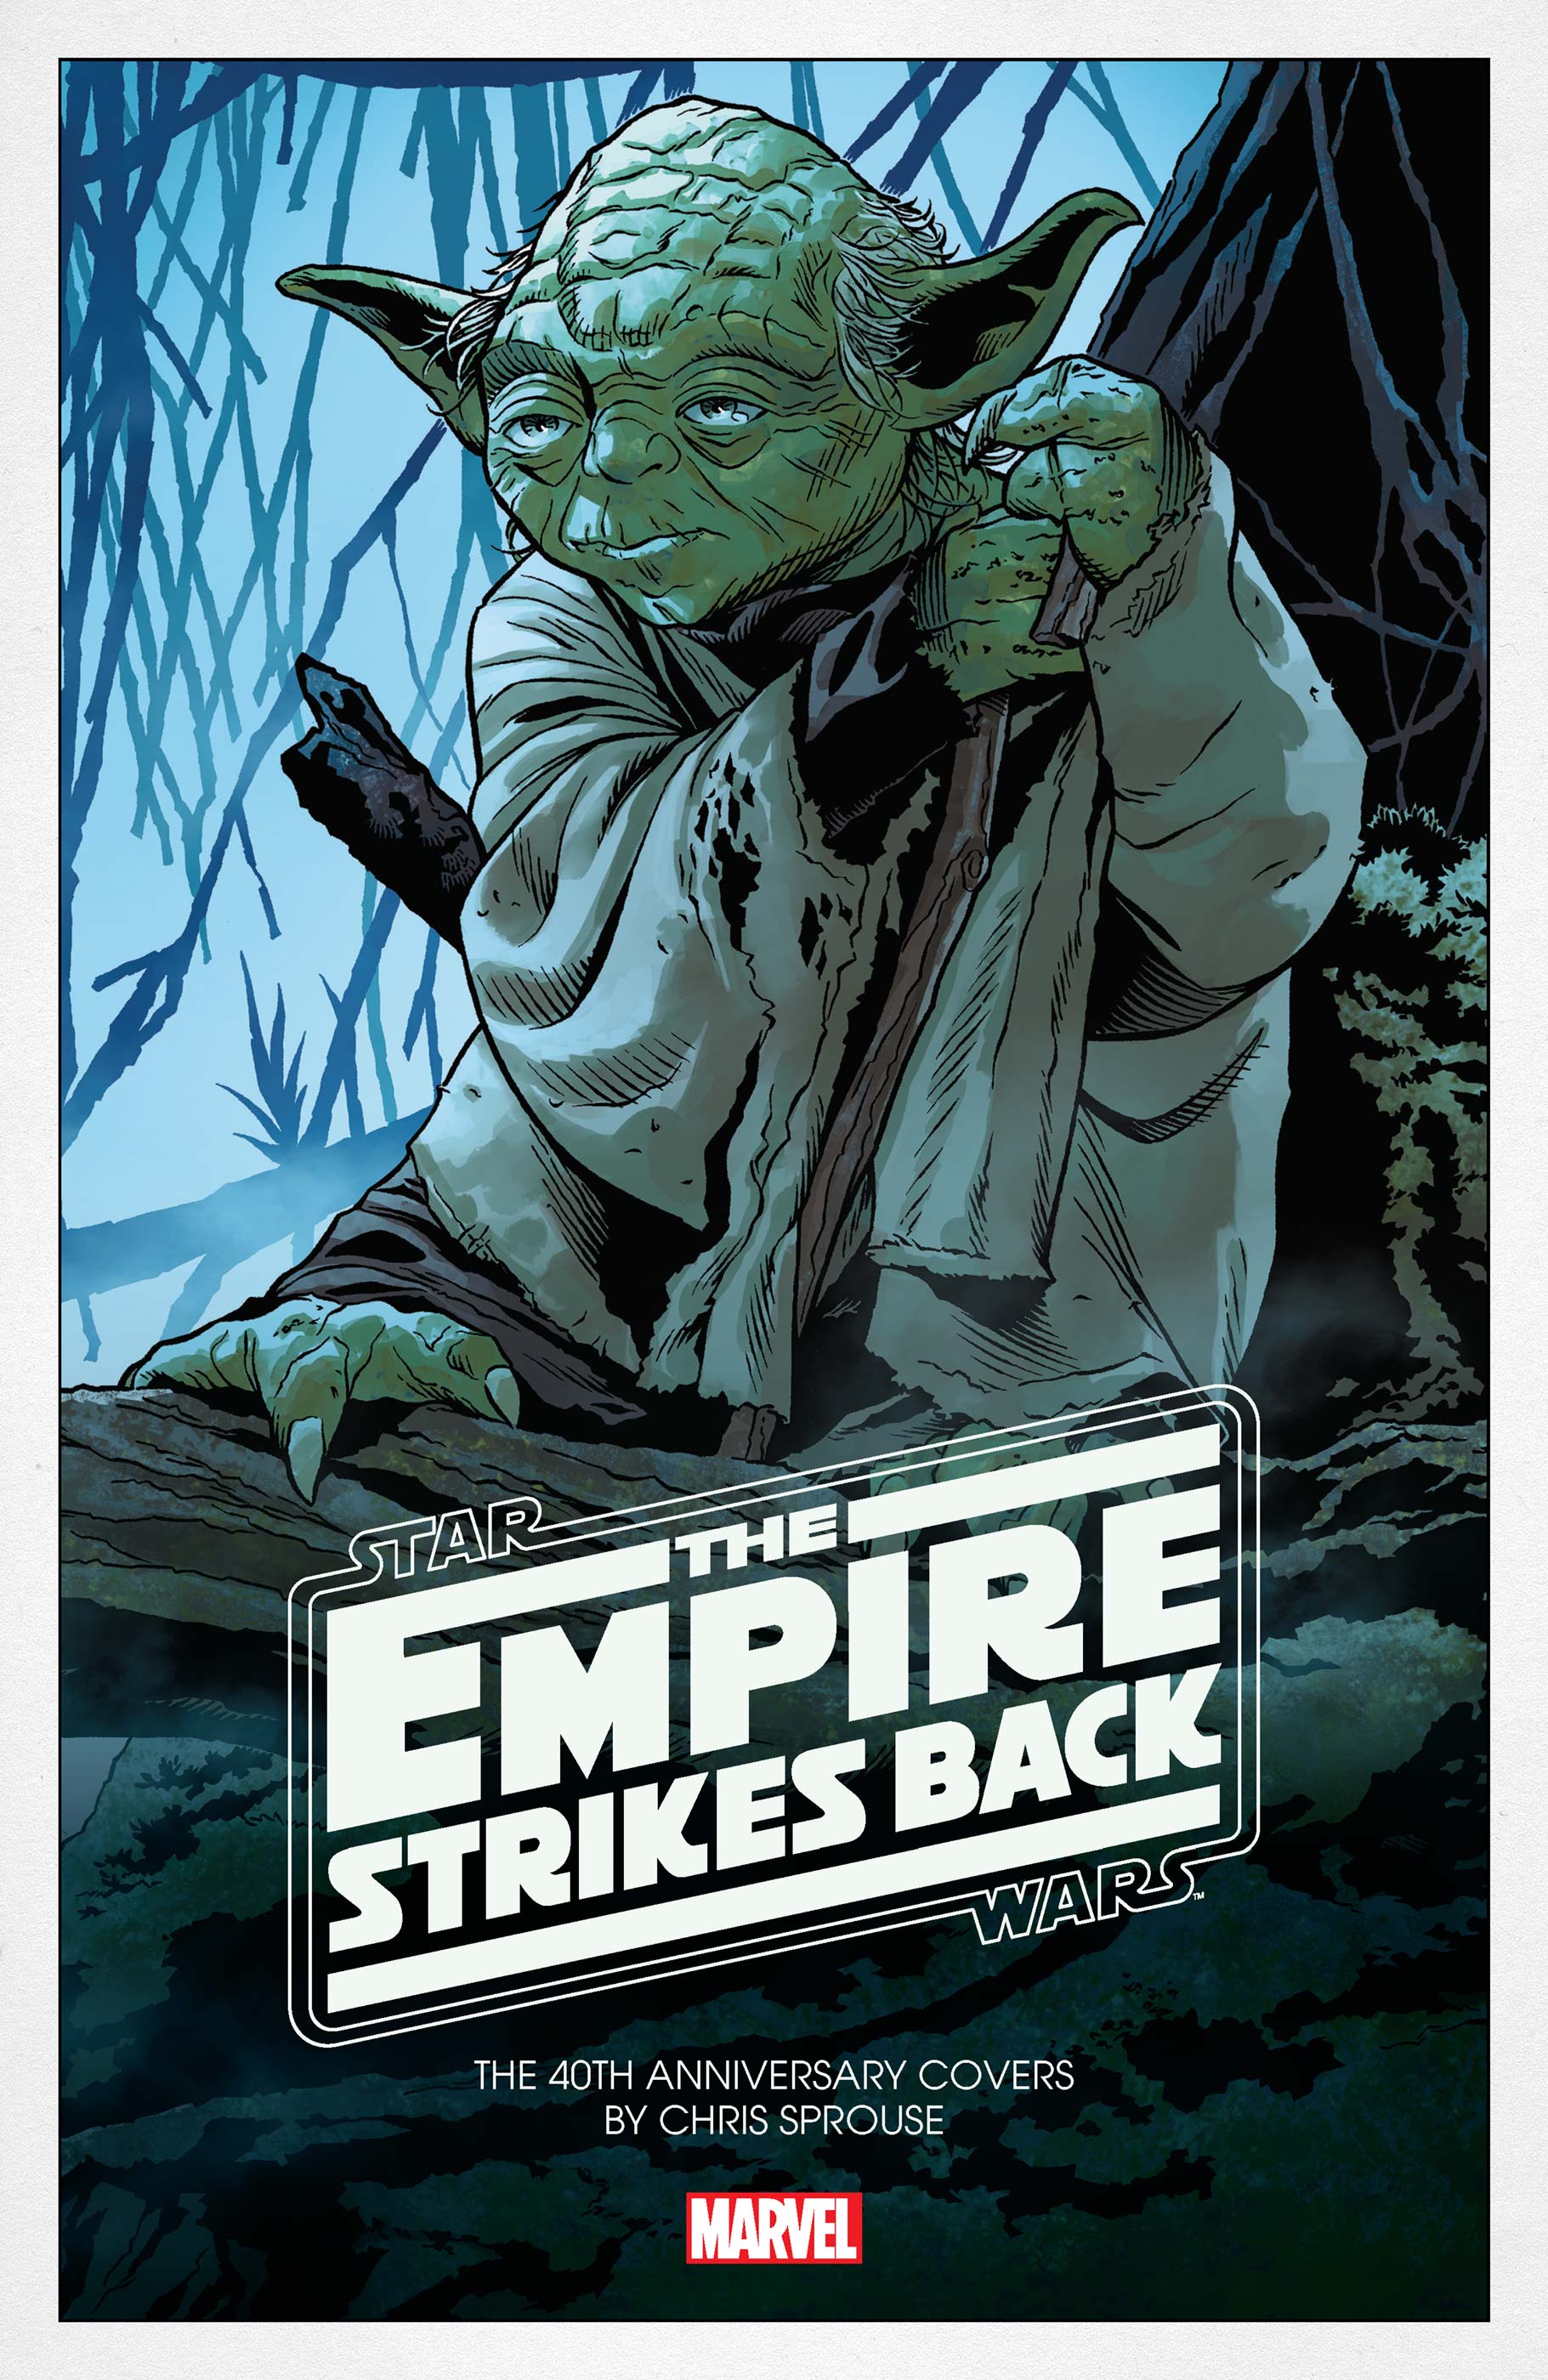 Star Wars: The Empire Strikes Back - The 40th Anniversary Covers by Chris Sprouse (2021) #1